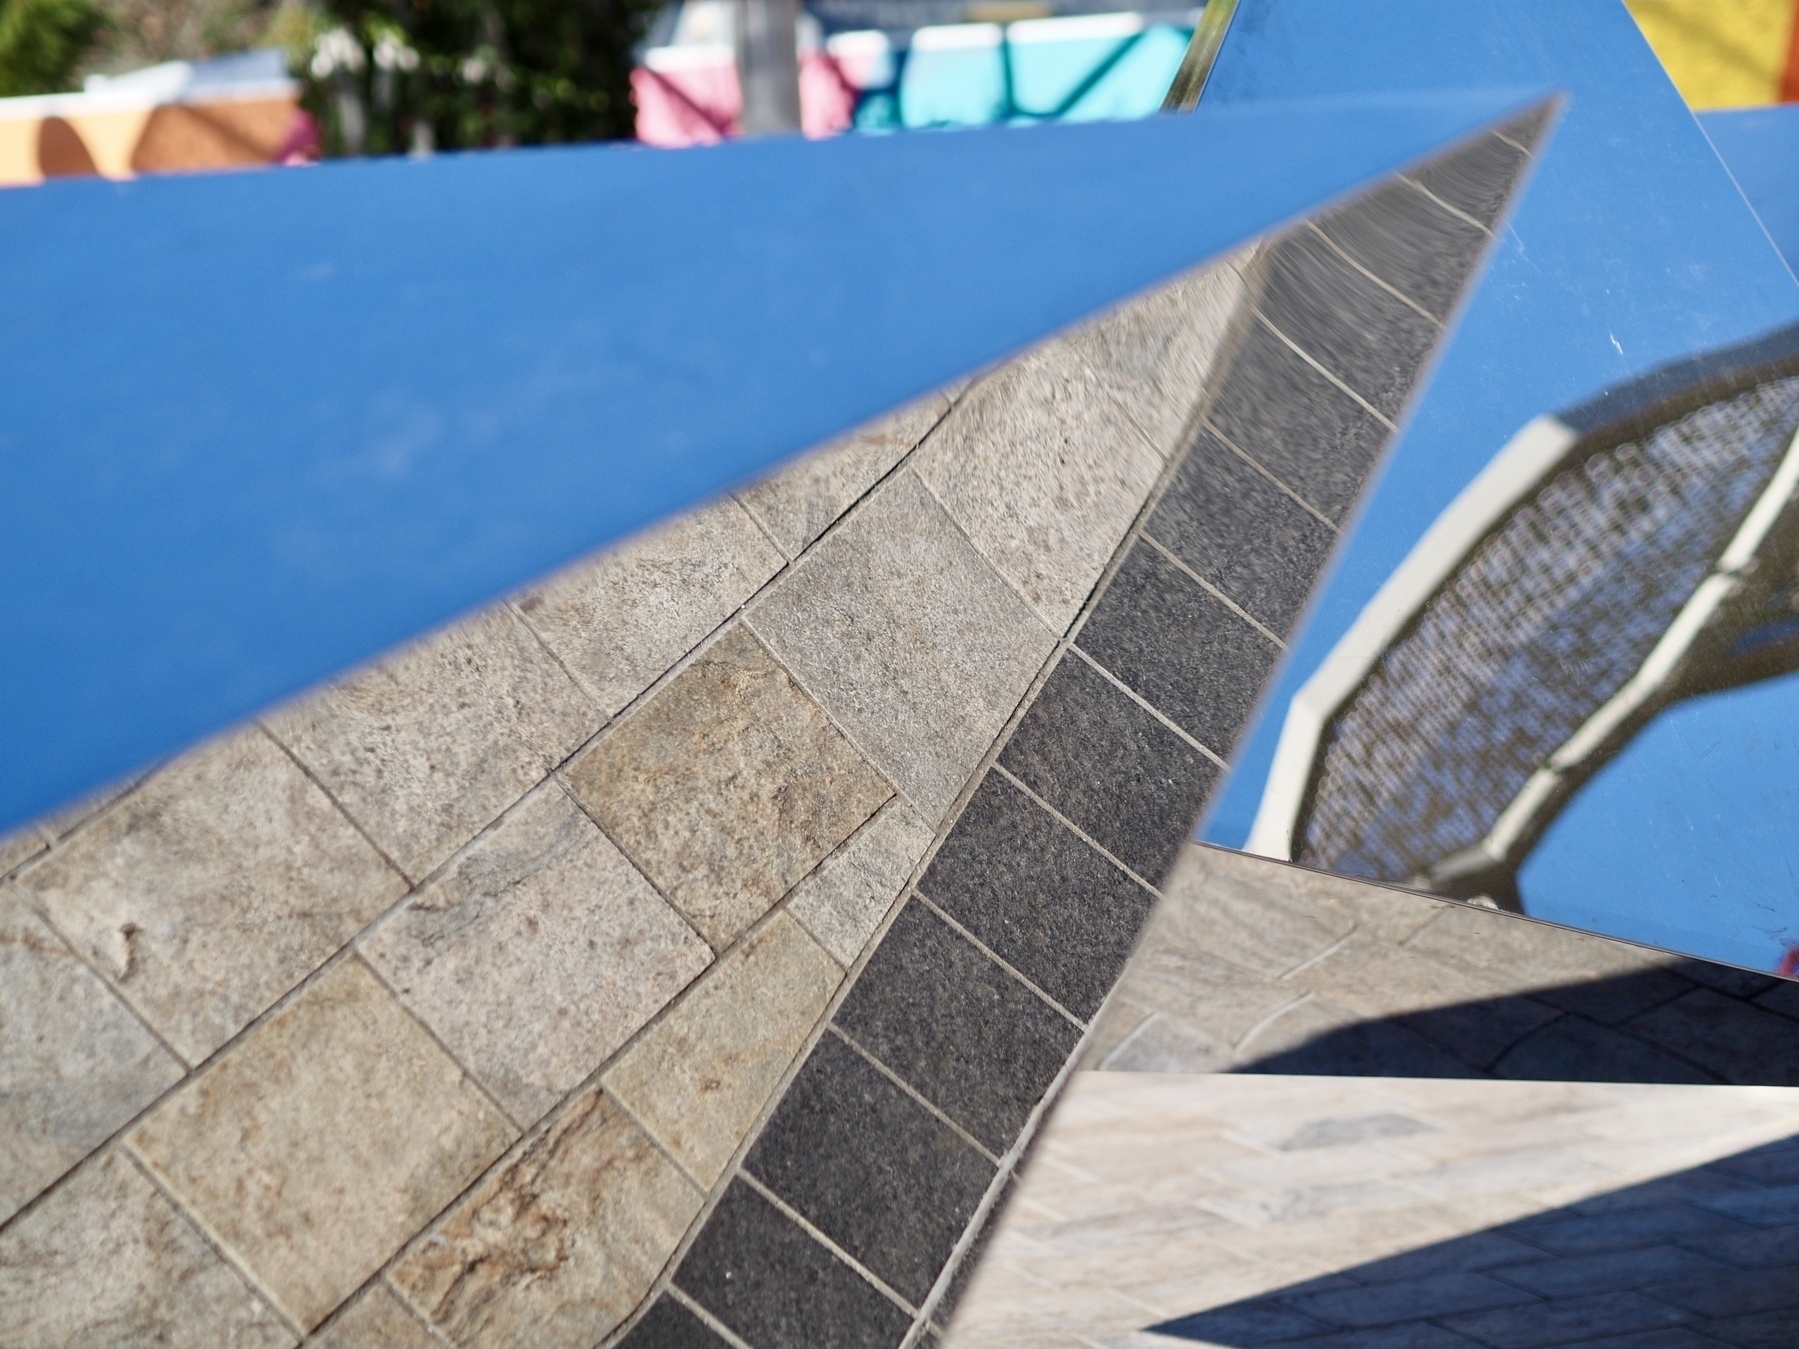 A reflective sculpture shows the pavers beneath itself.